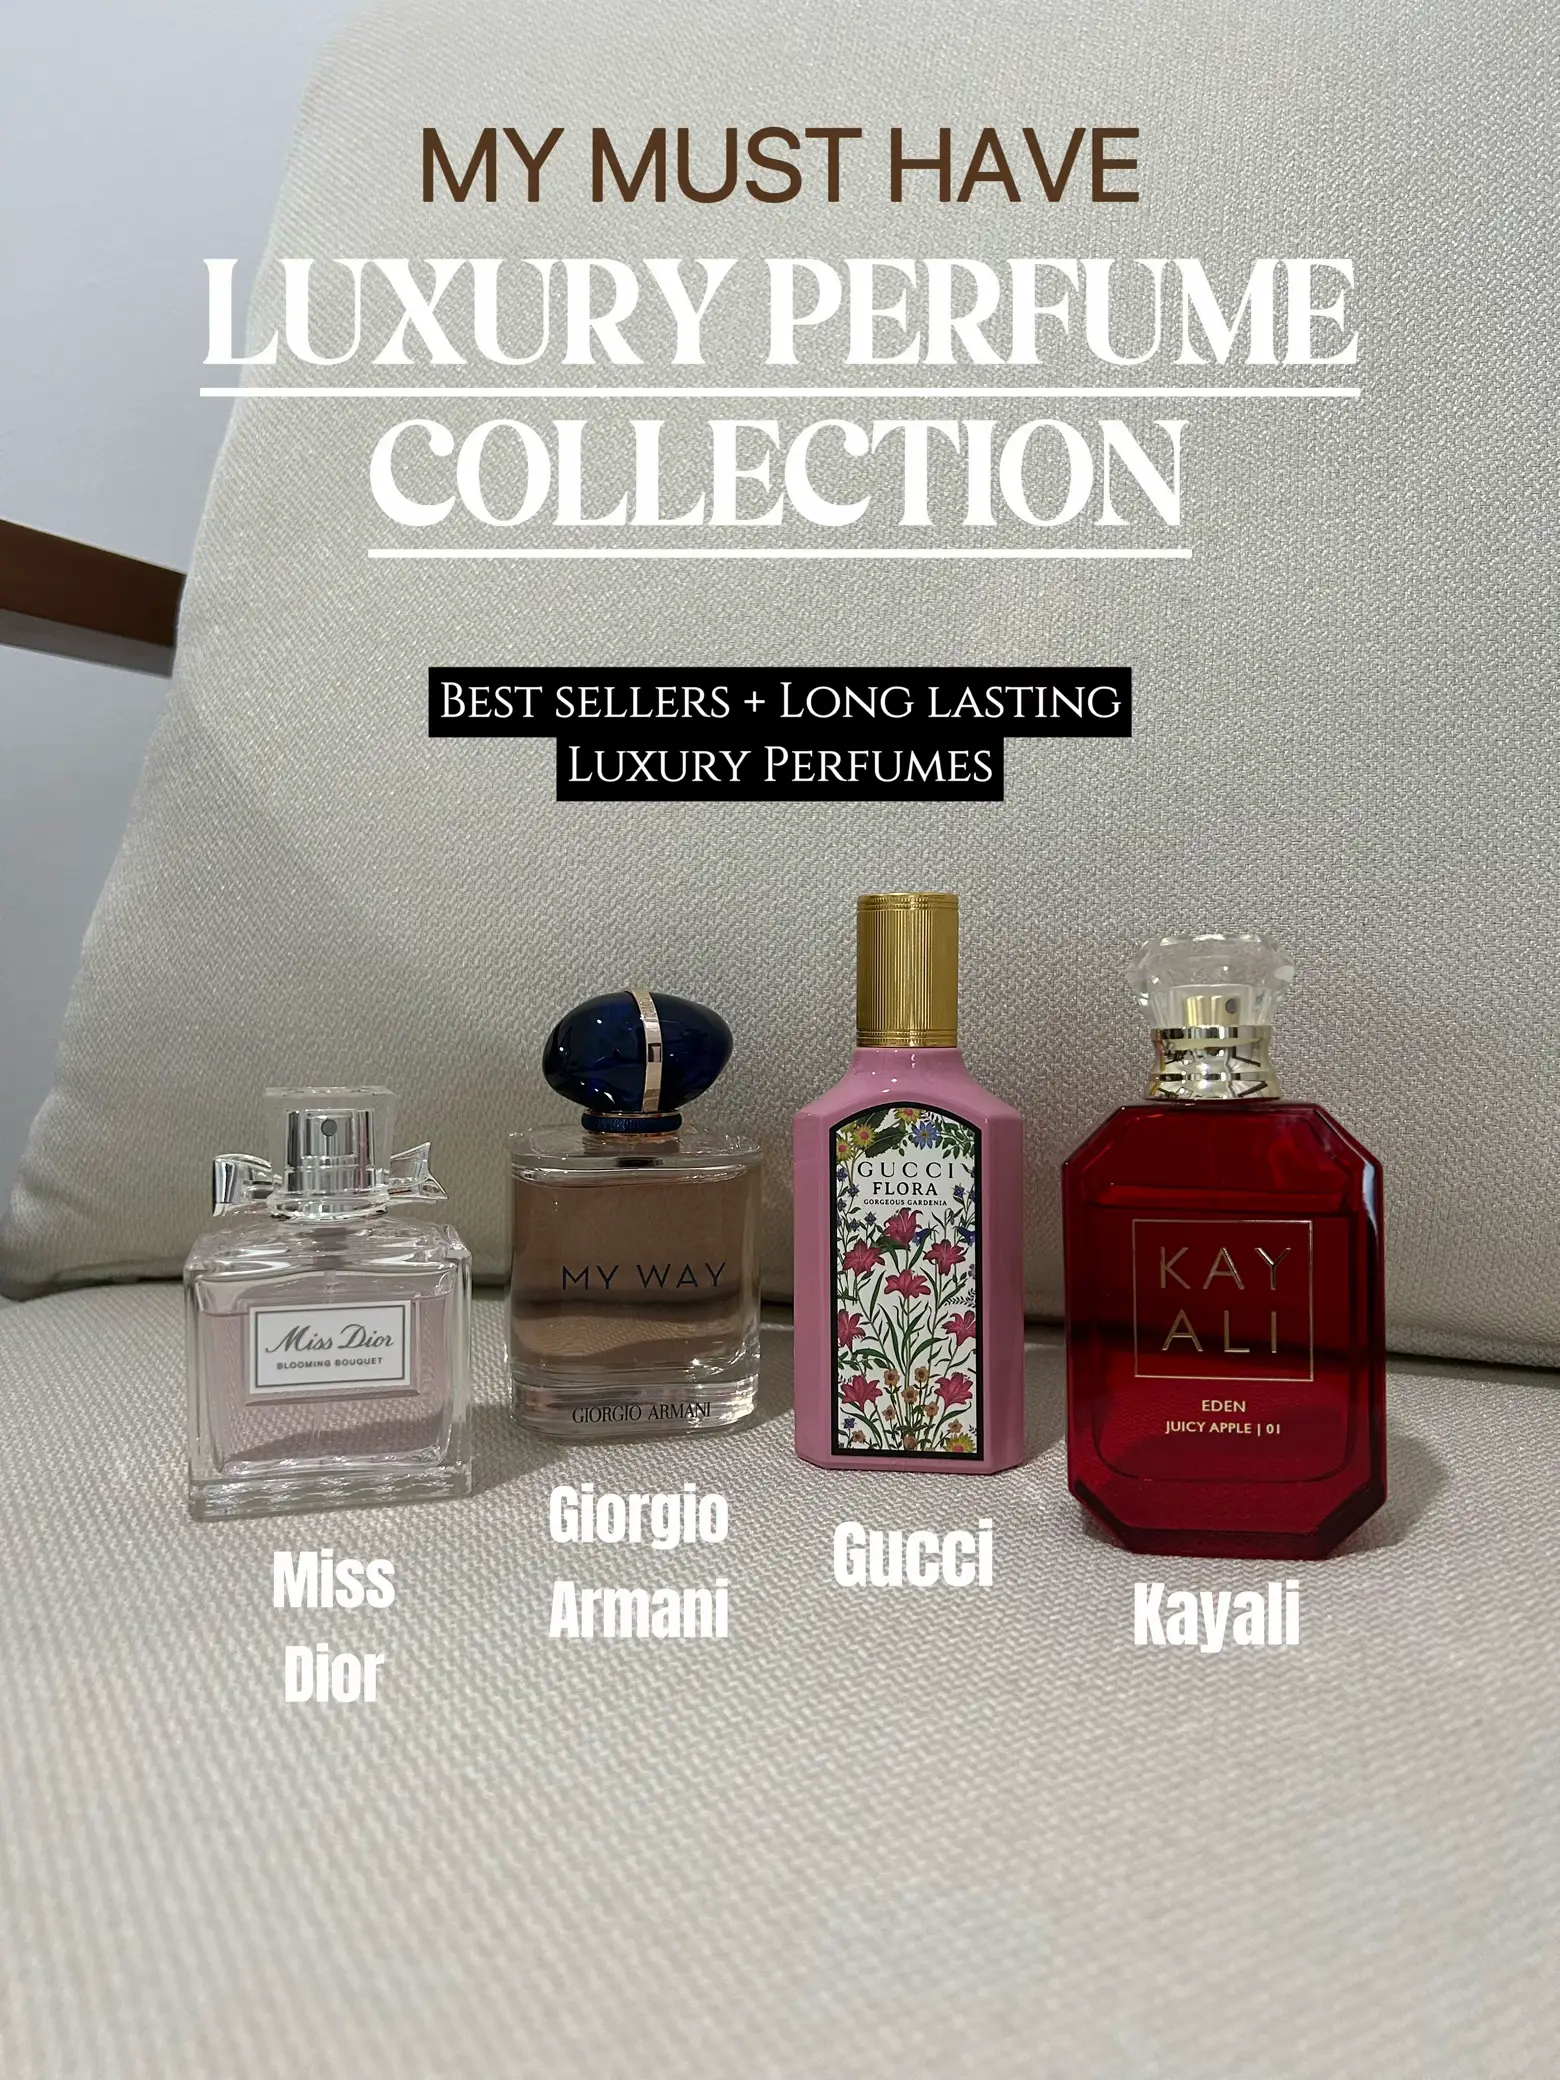 TOP 4 LUXURY PERFUME YOU MUST OWN!